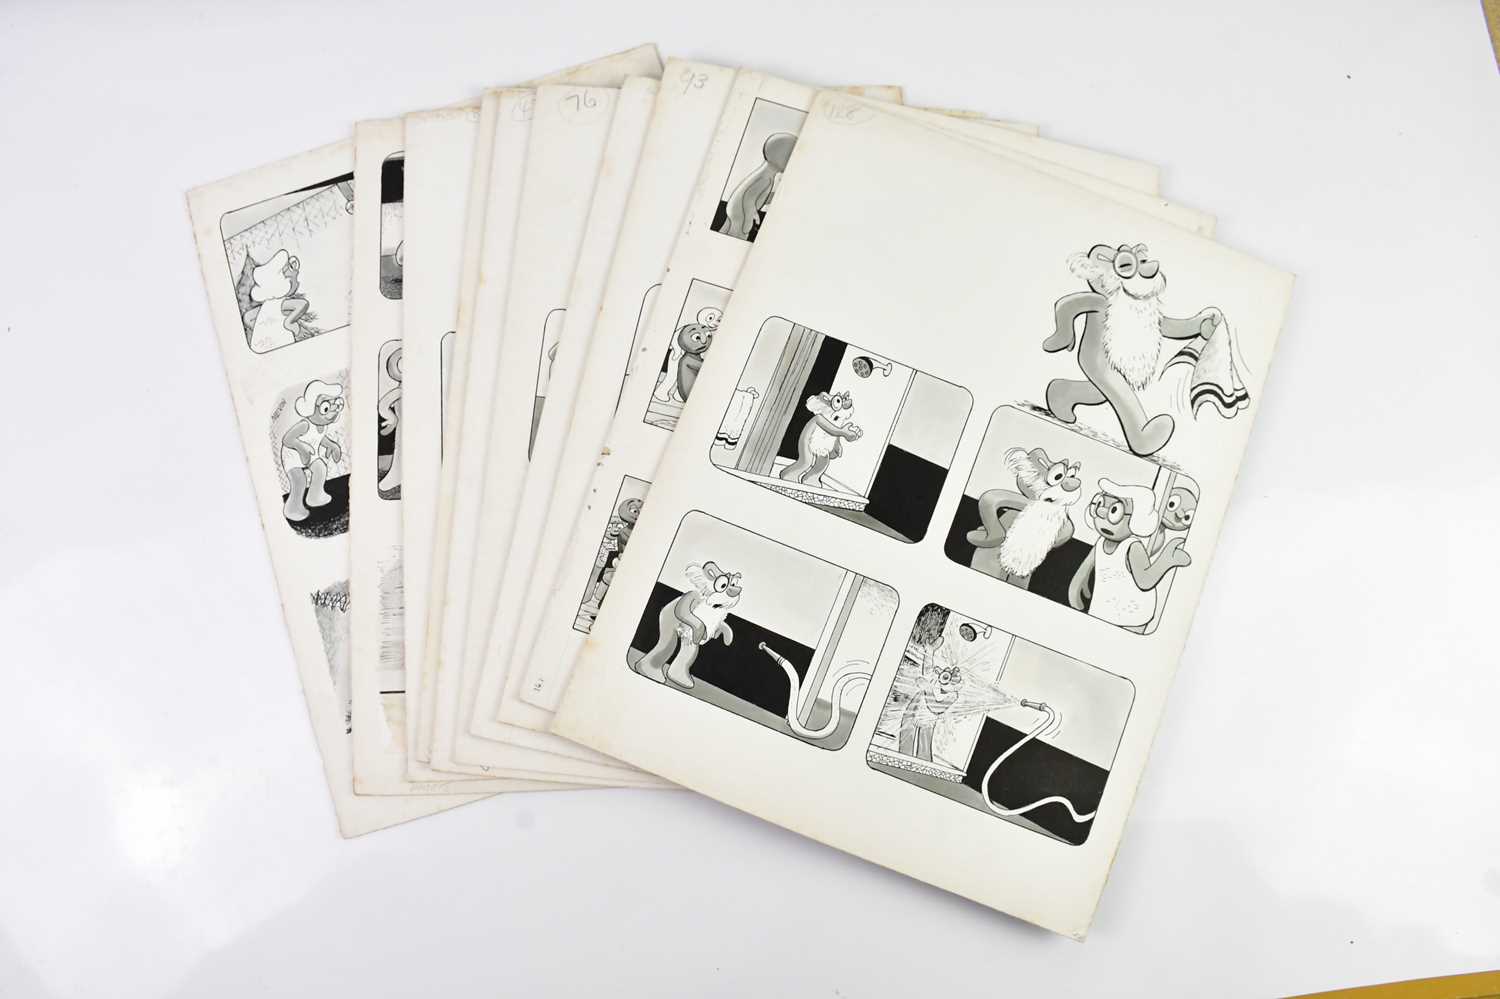 † BILL MEVIN; ten original black and white storyboard cartoons for Morph, produced for holiday